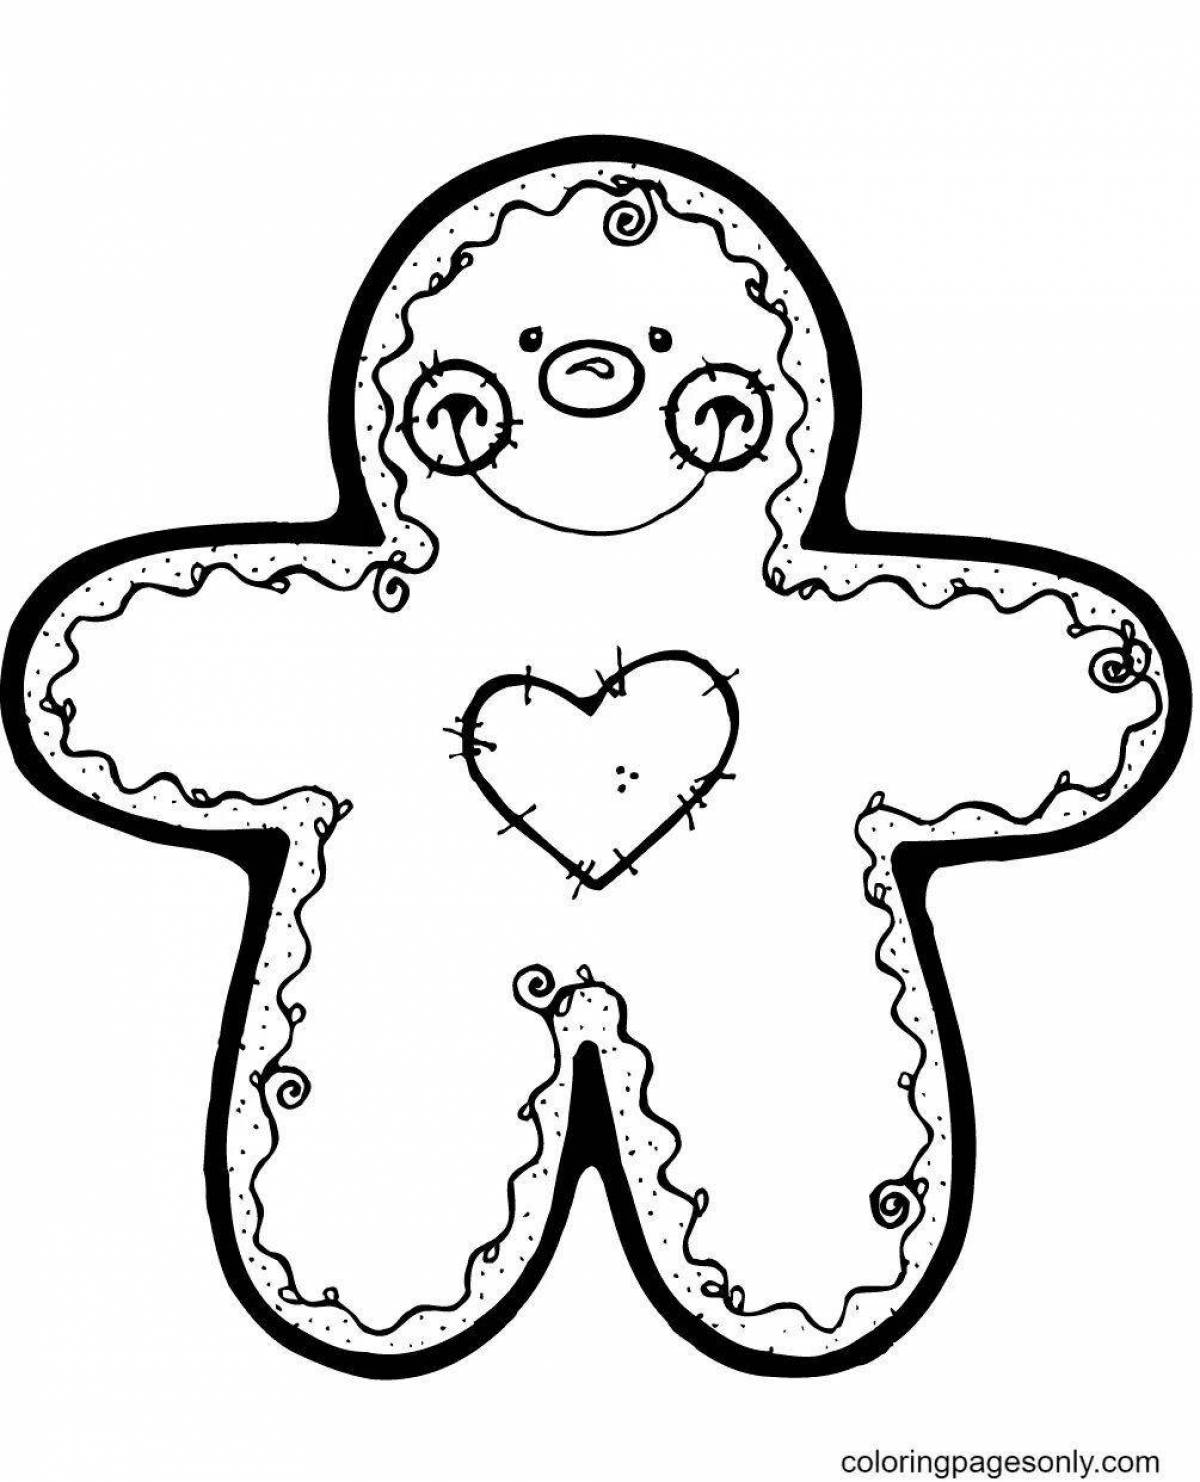 Gourmet Christmas cookies coloring page